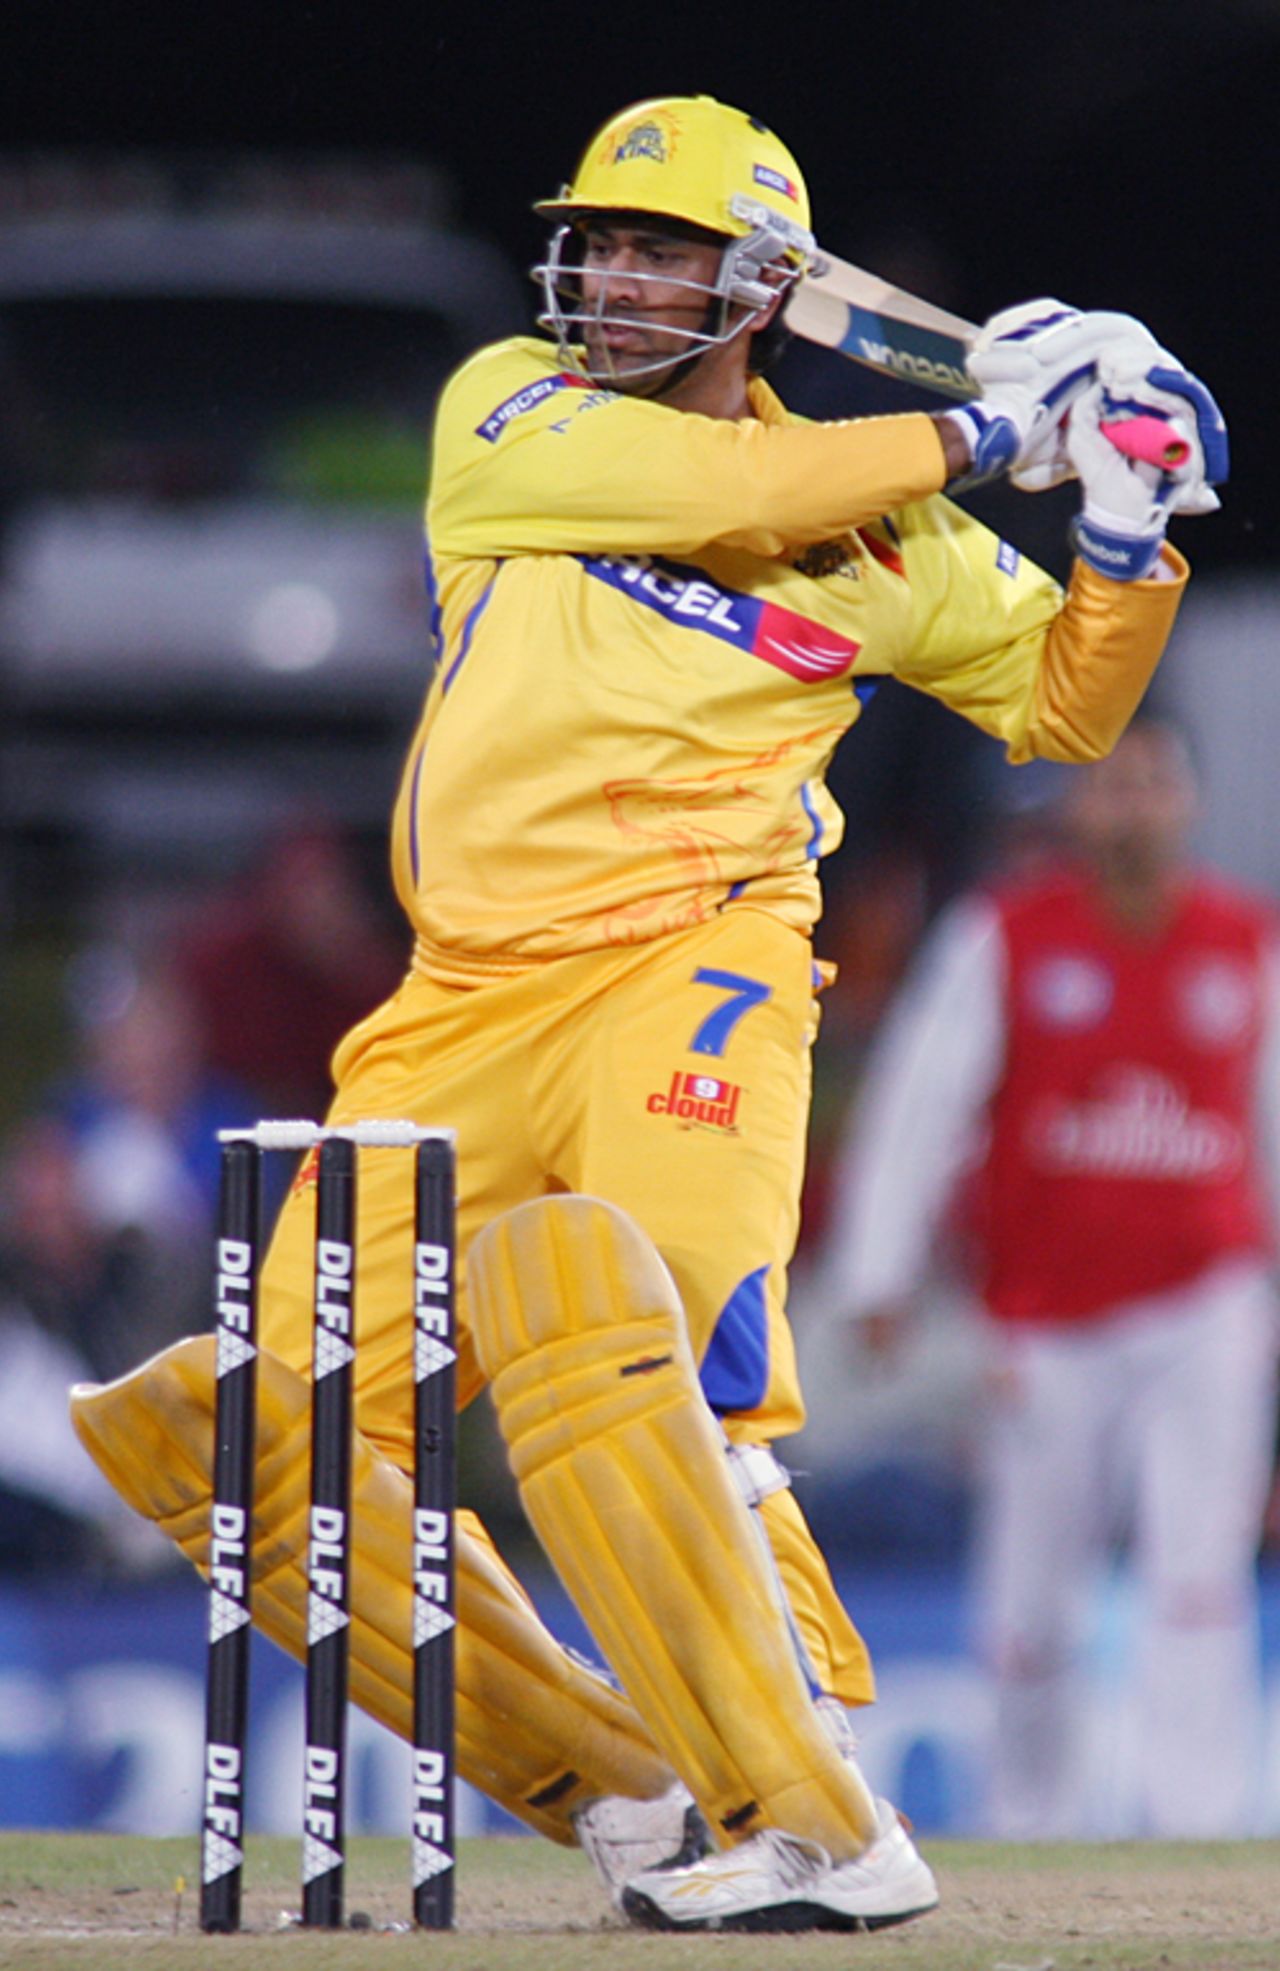 MS Dhoni goes on the offensive, Chennai Super Kings v Kings XI Punjab, IPL, 34th match, Centurion, May 7, 2009